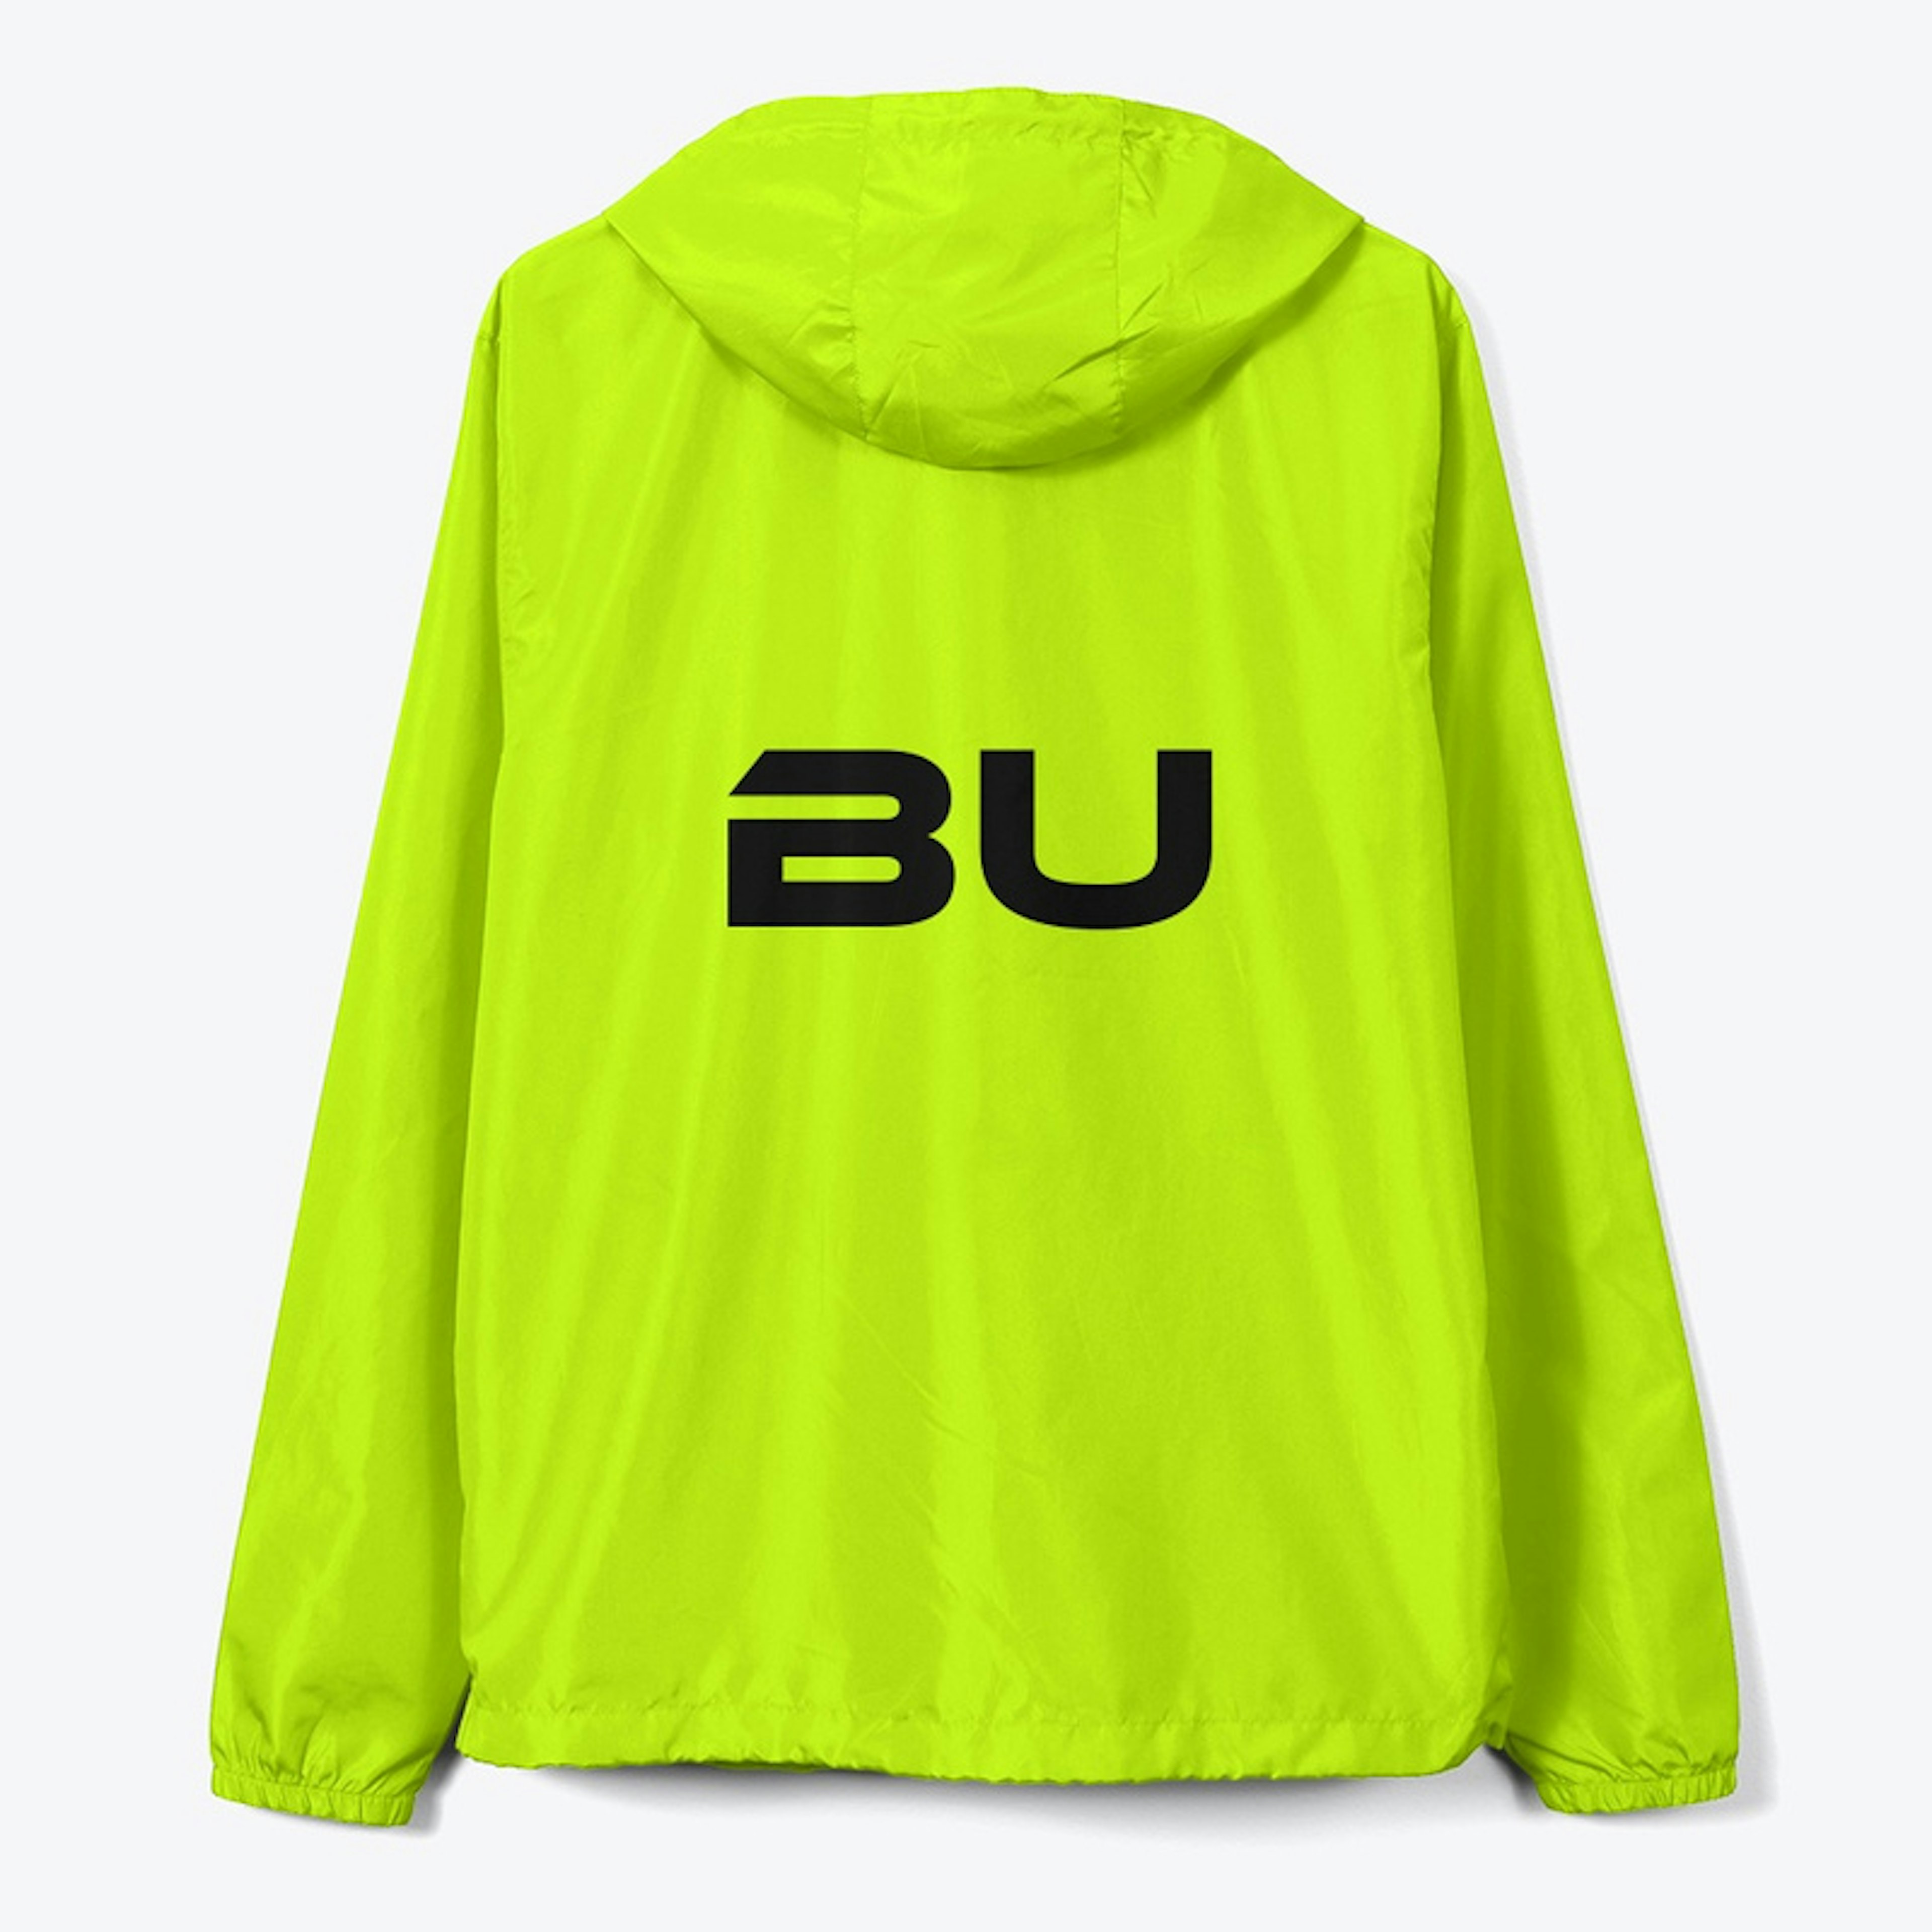 Be Confident in BU Designed for everyone